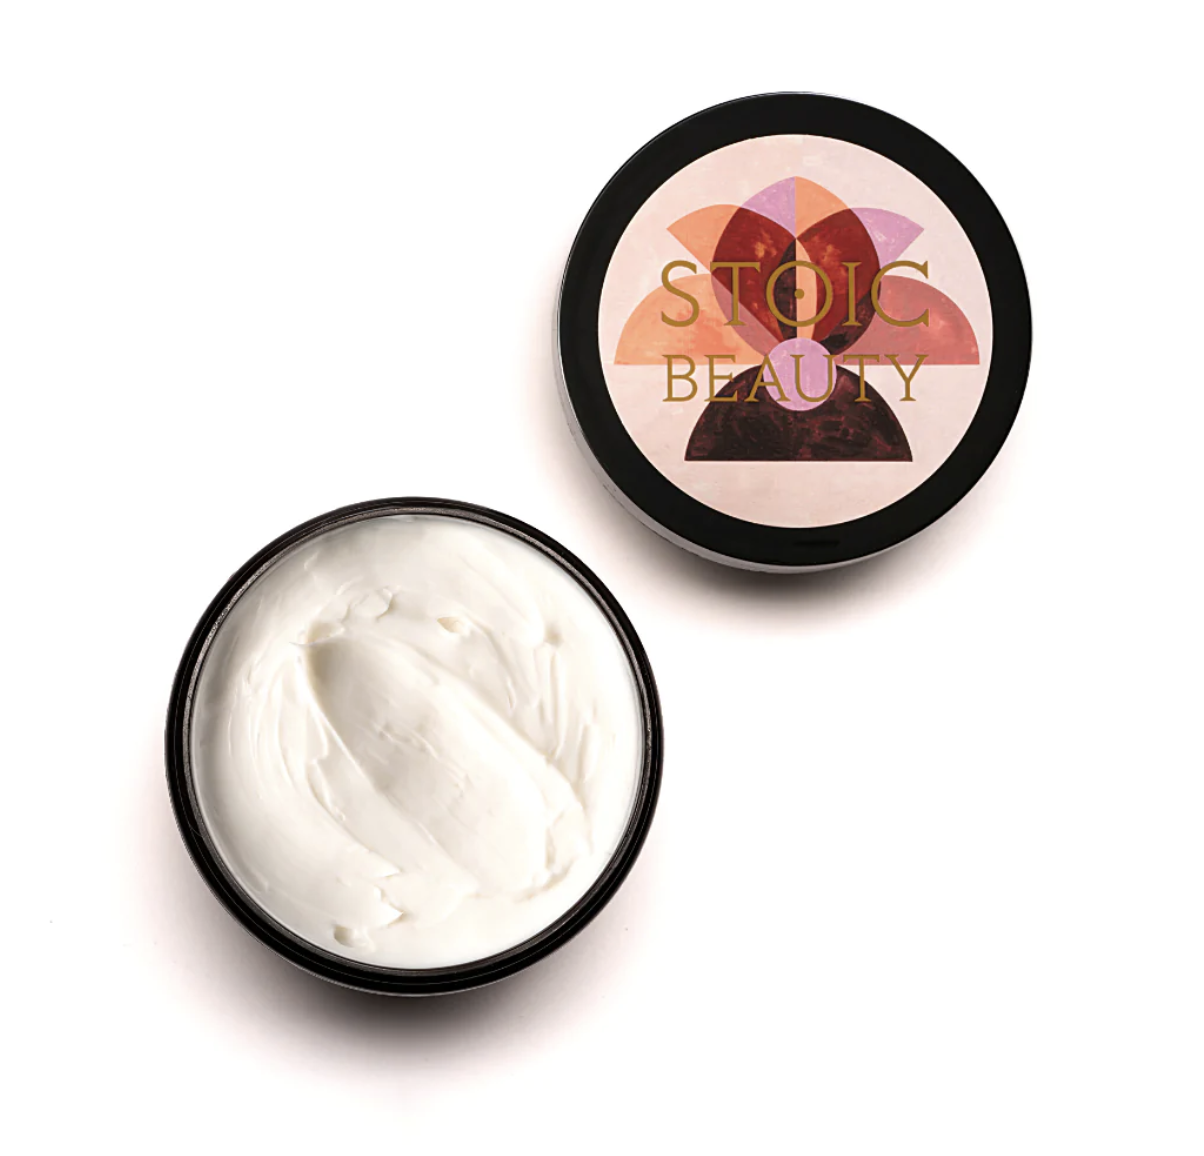 Stoic Beauty Agape Cocoa & Prickly Pear Body Butter